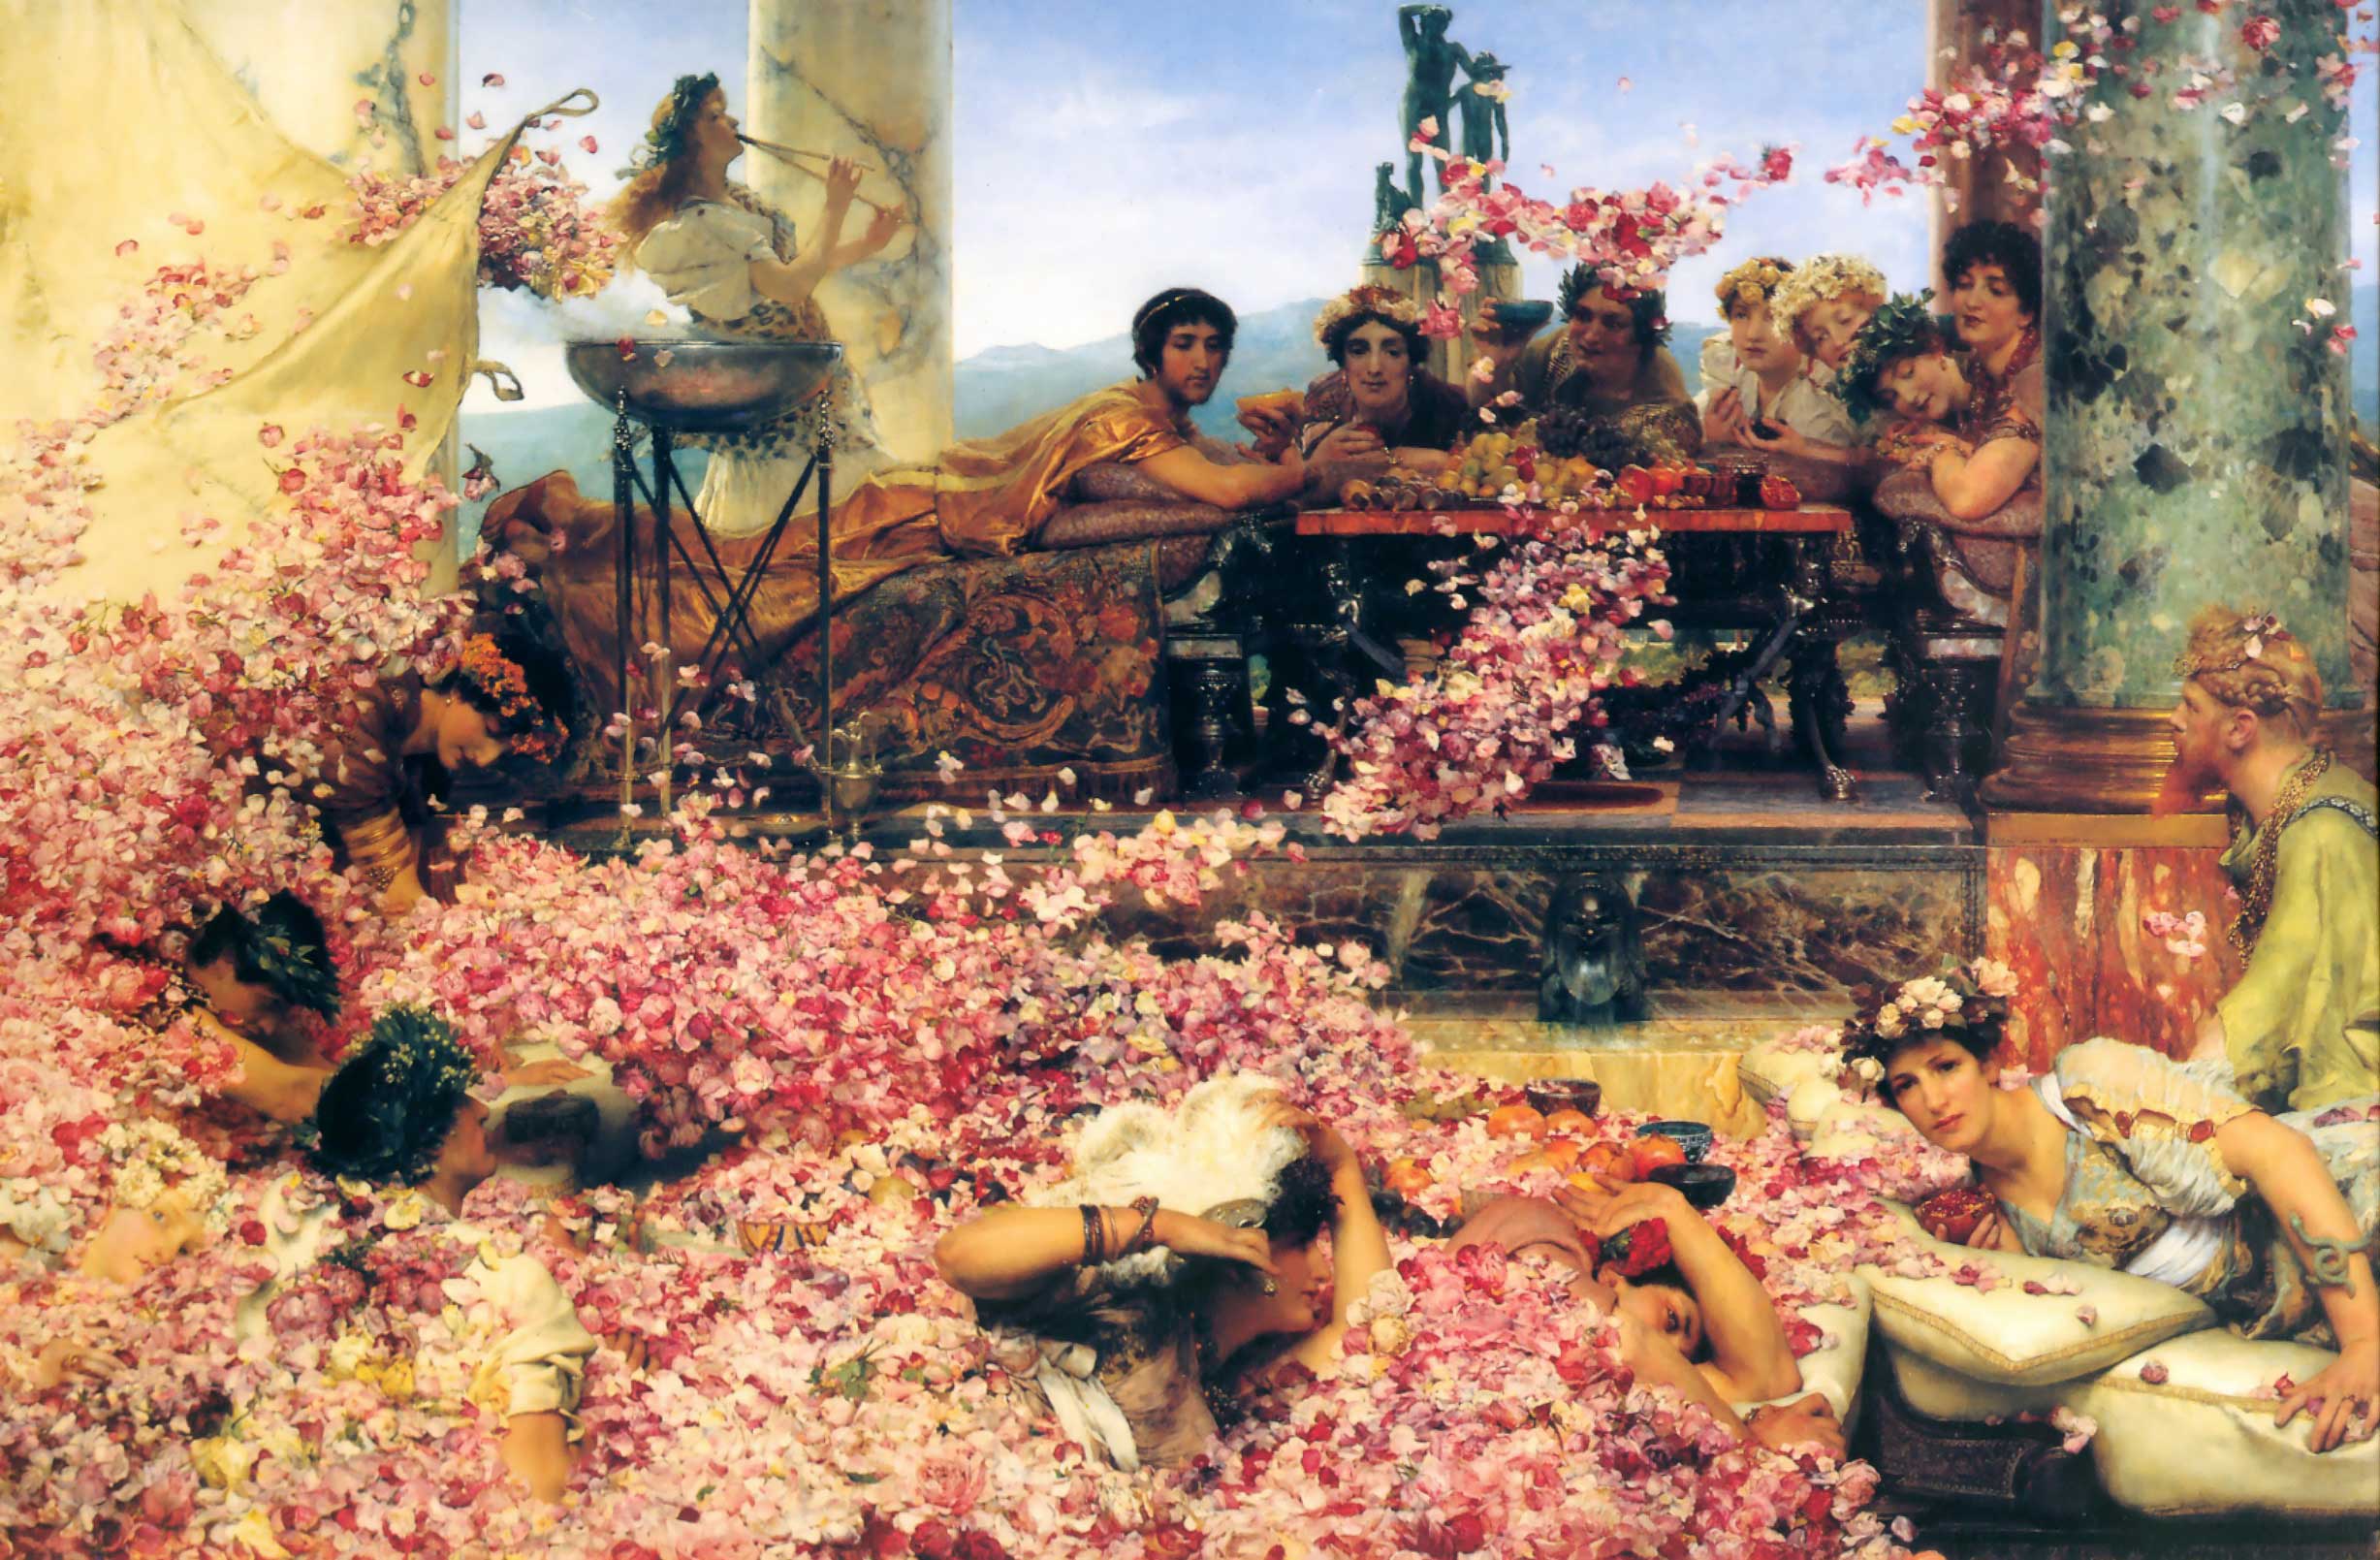 The Roses of Heliogabalus by Lawrence Alma-Tadema - 1888 - 213.9 x 132.1 cm private collection